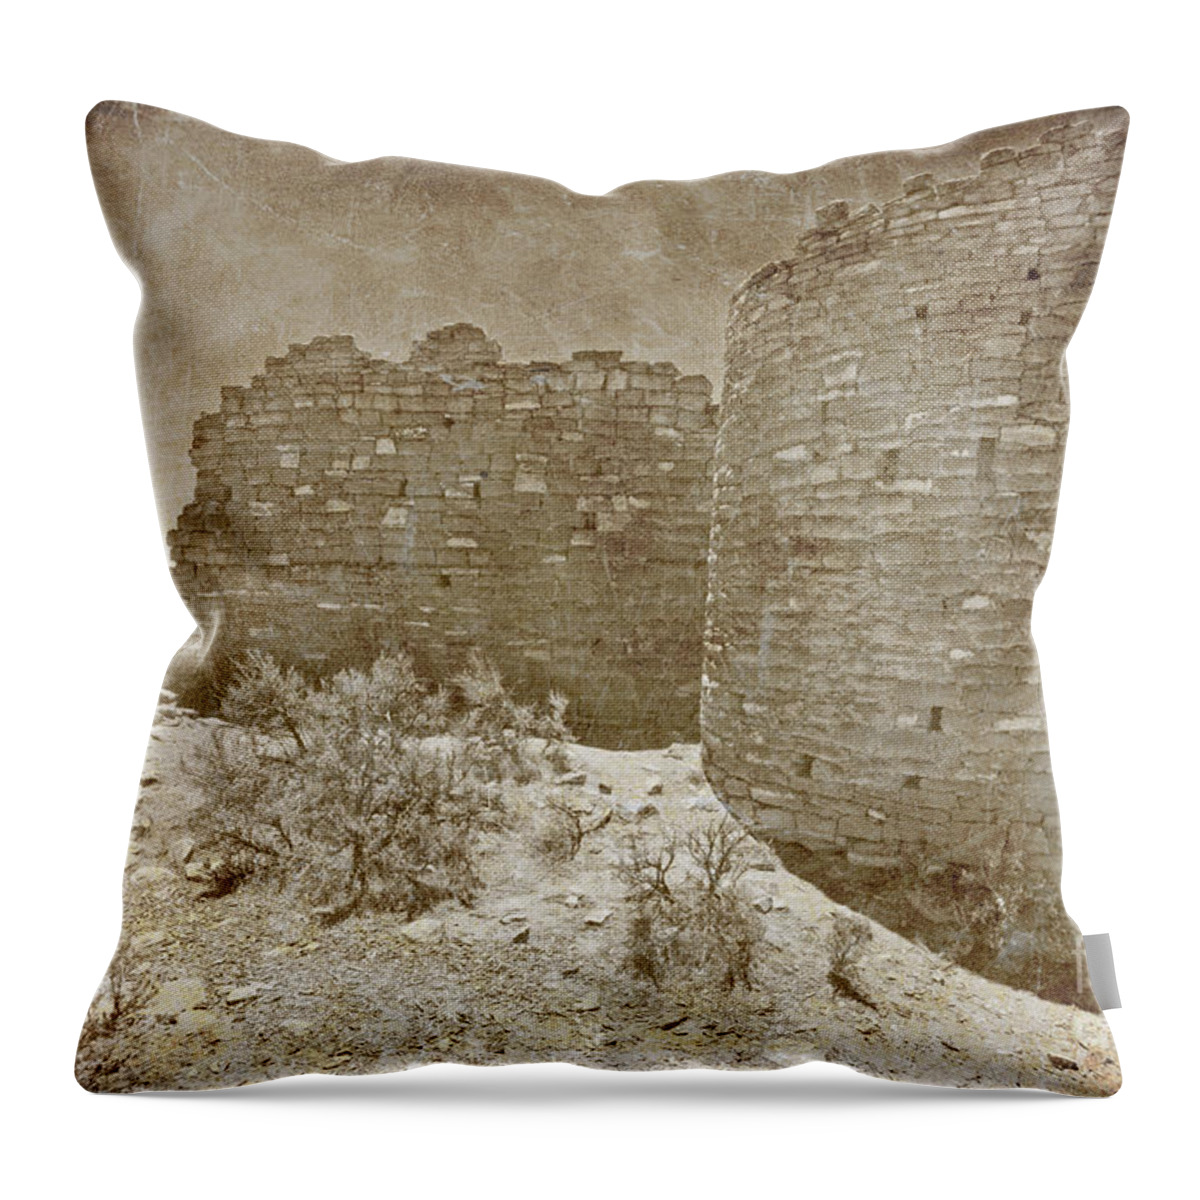 Ruin Throw Pillow featuring the photograph Vintage Hovenweep Castle by Bob and Nancy Kendrick